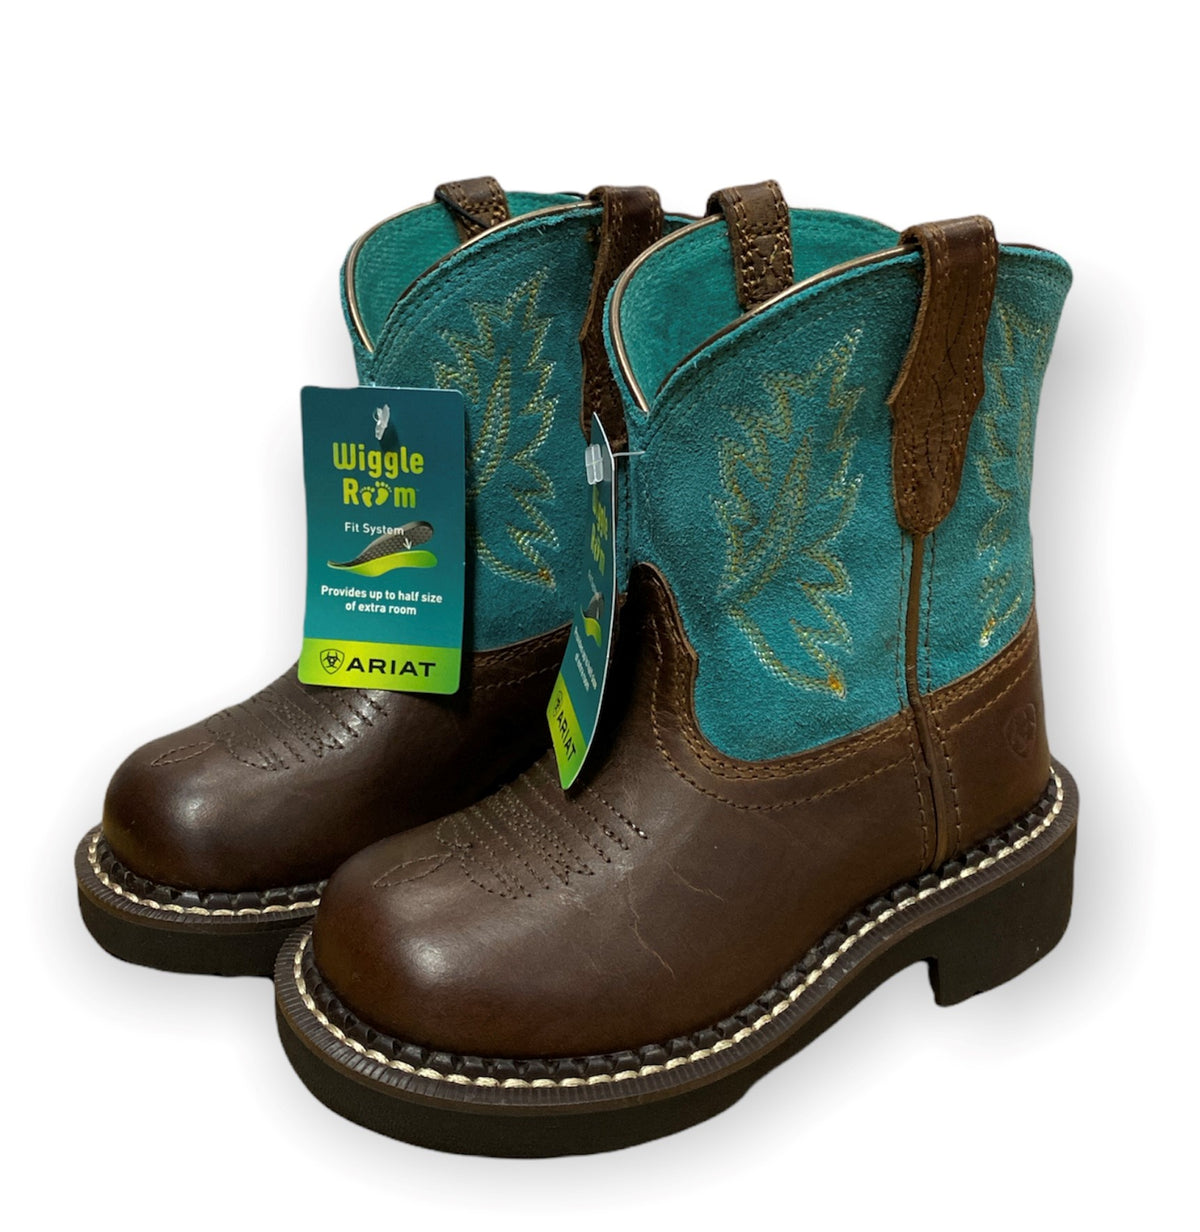 Ariat Kds Fatbaby Heritage Distressed Brown/Turquoise